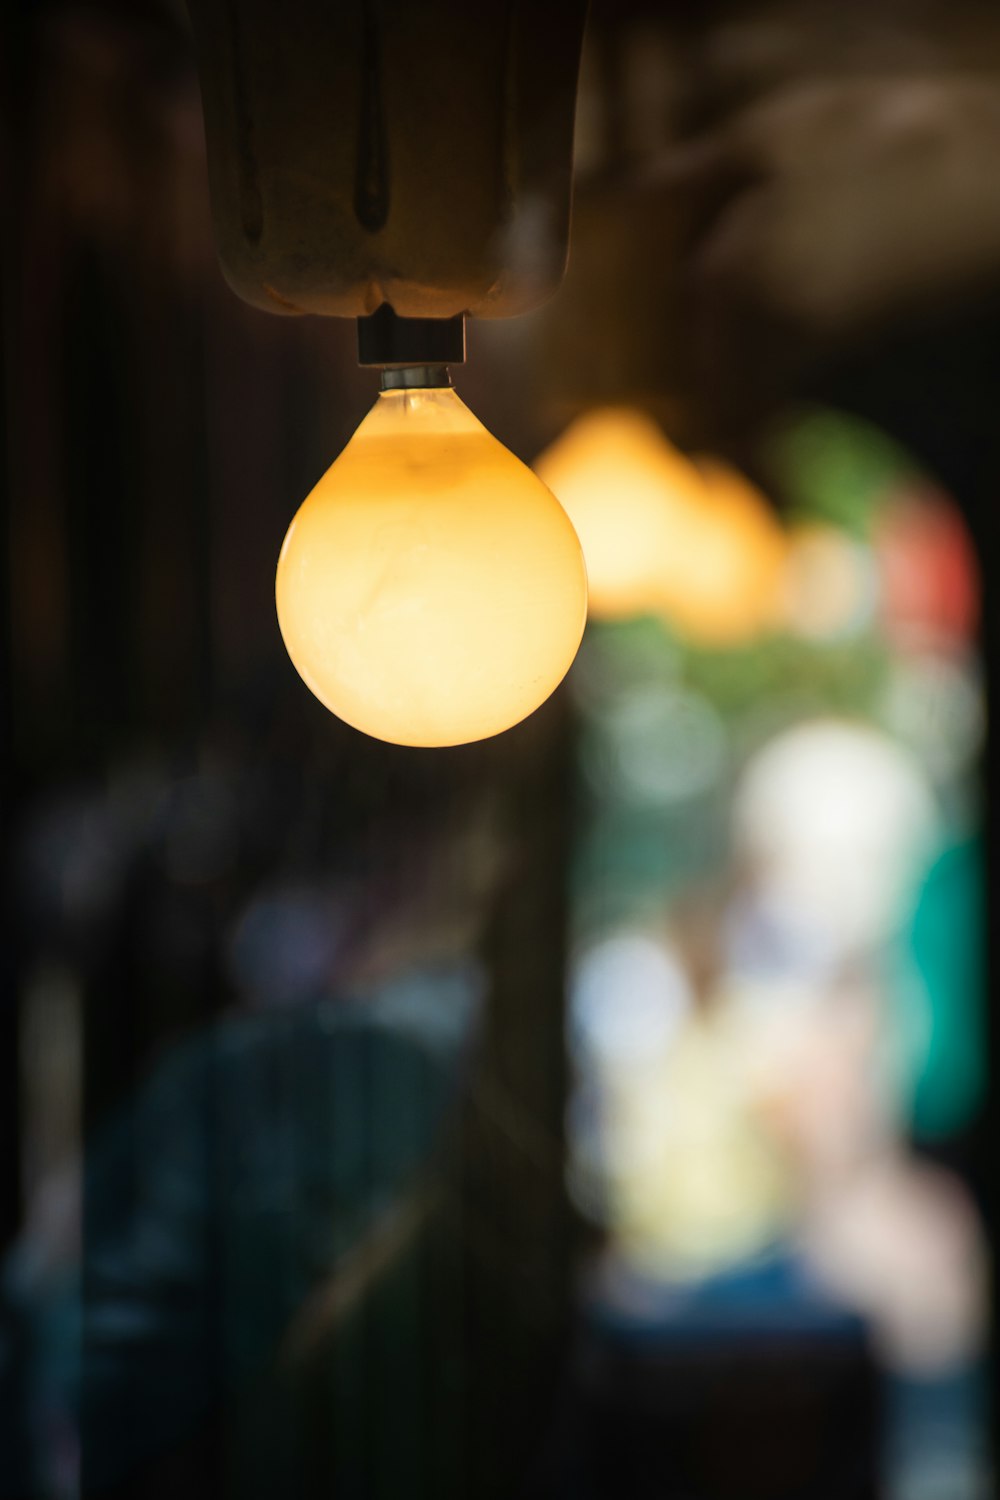 a close up of a light bulb with a blurry background